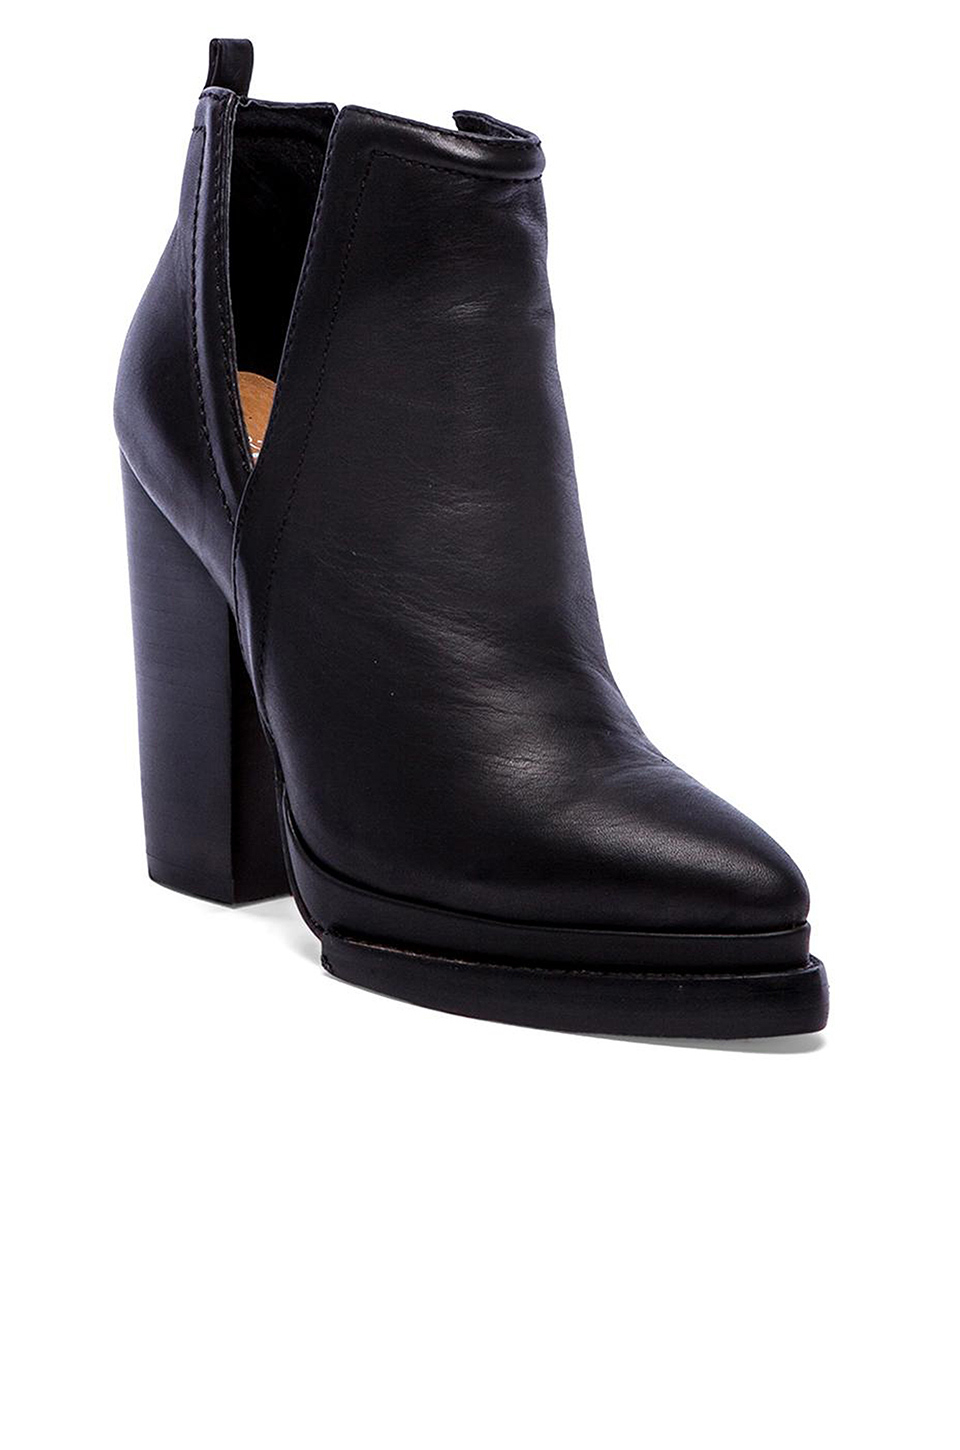 Lyst - Jeffrey Campbell Whose Next Bootie in Black